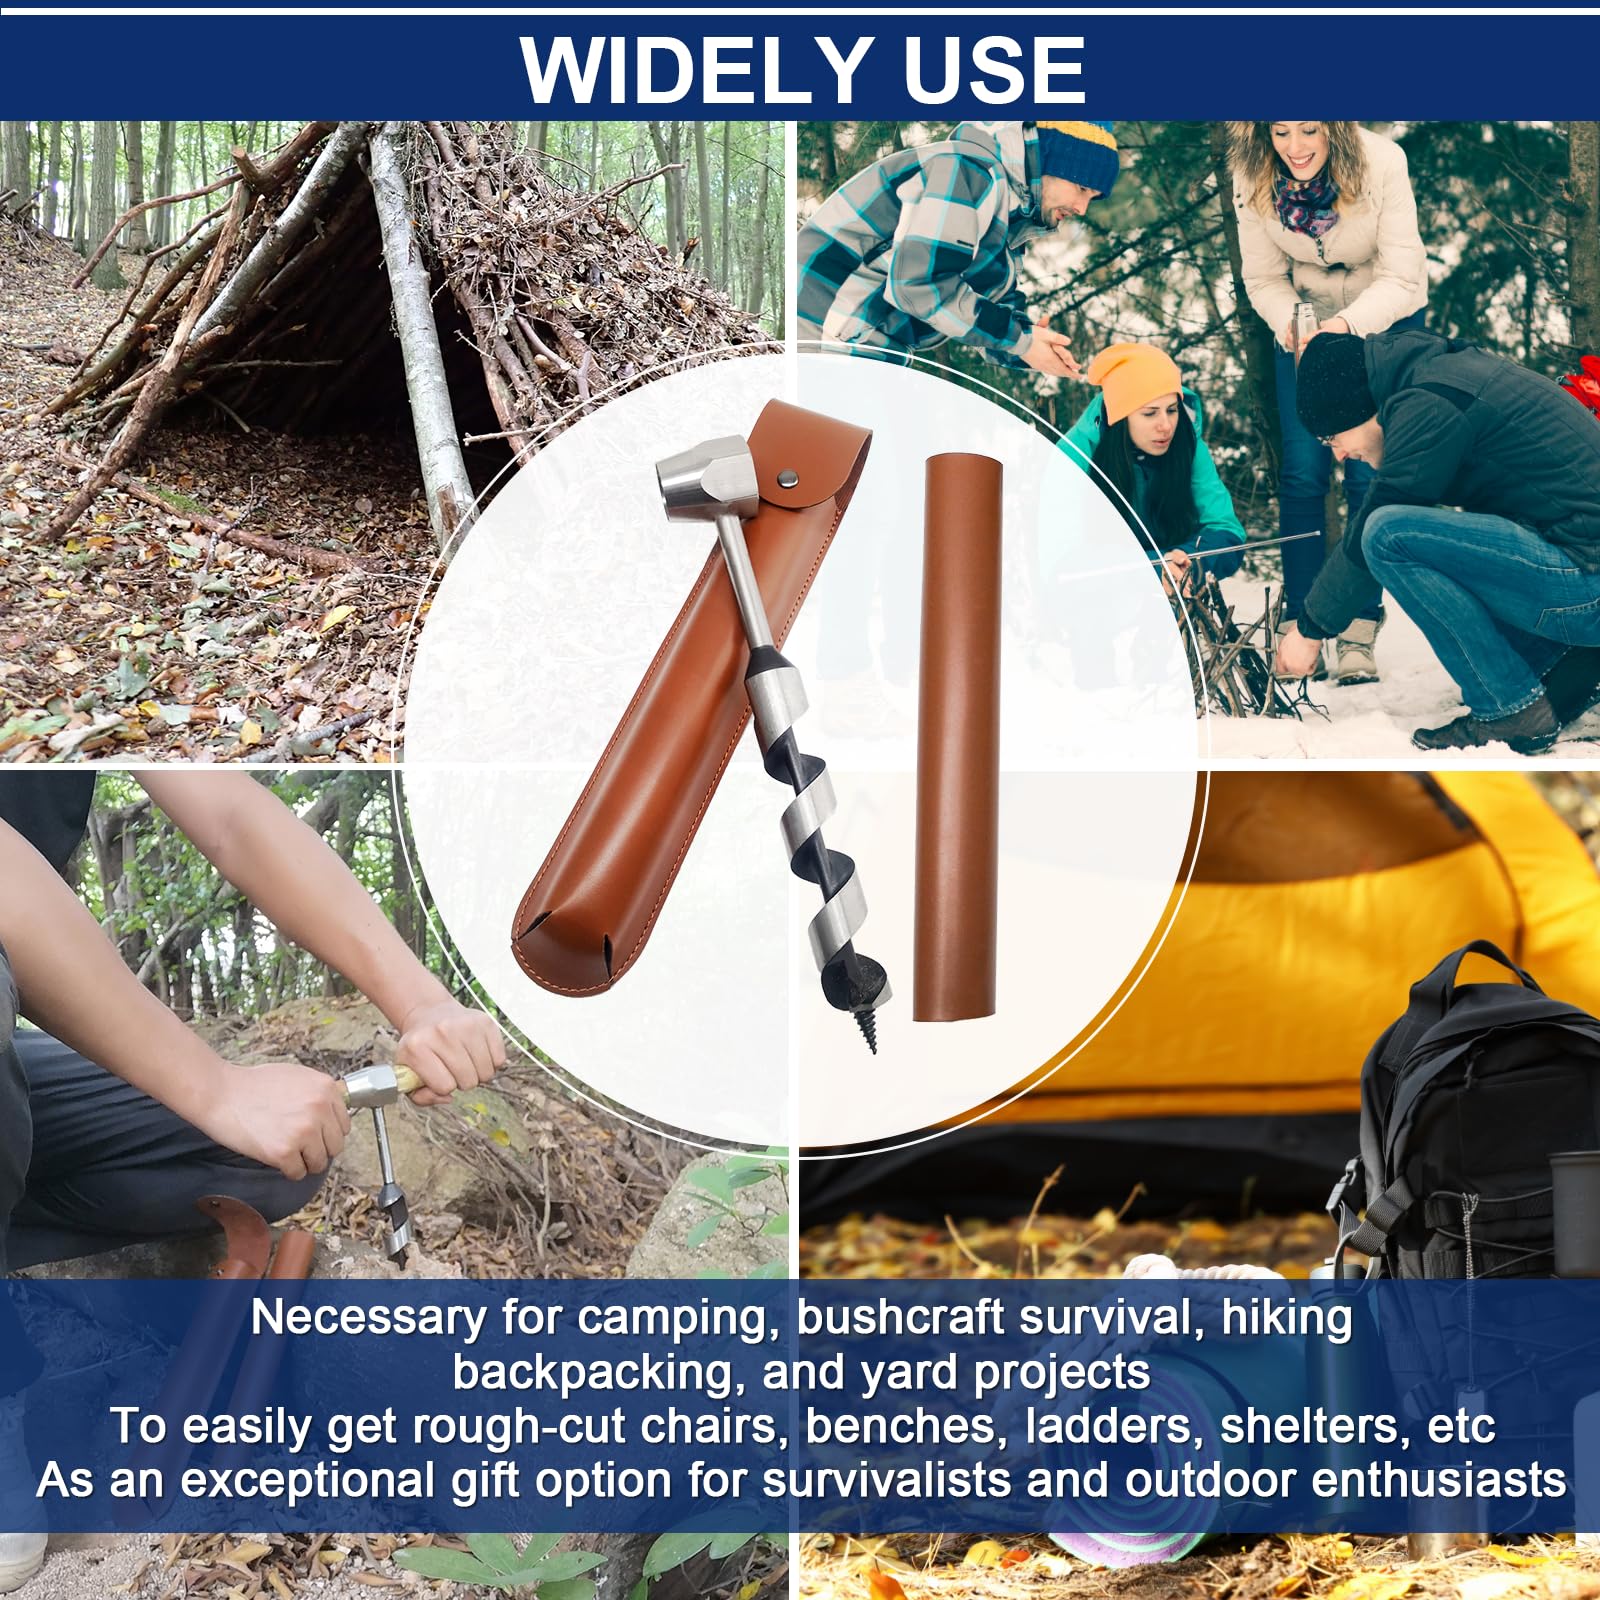 1 X 10-inch Hand Auger Wood Drill, Hexagon Embedded Welding Bushcraft Hand Auger Wrench Scotch Eye Auger Manual Bushcraft Auger Set w/Leather Case Survival Tools -by MinliGUY